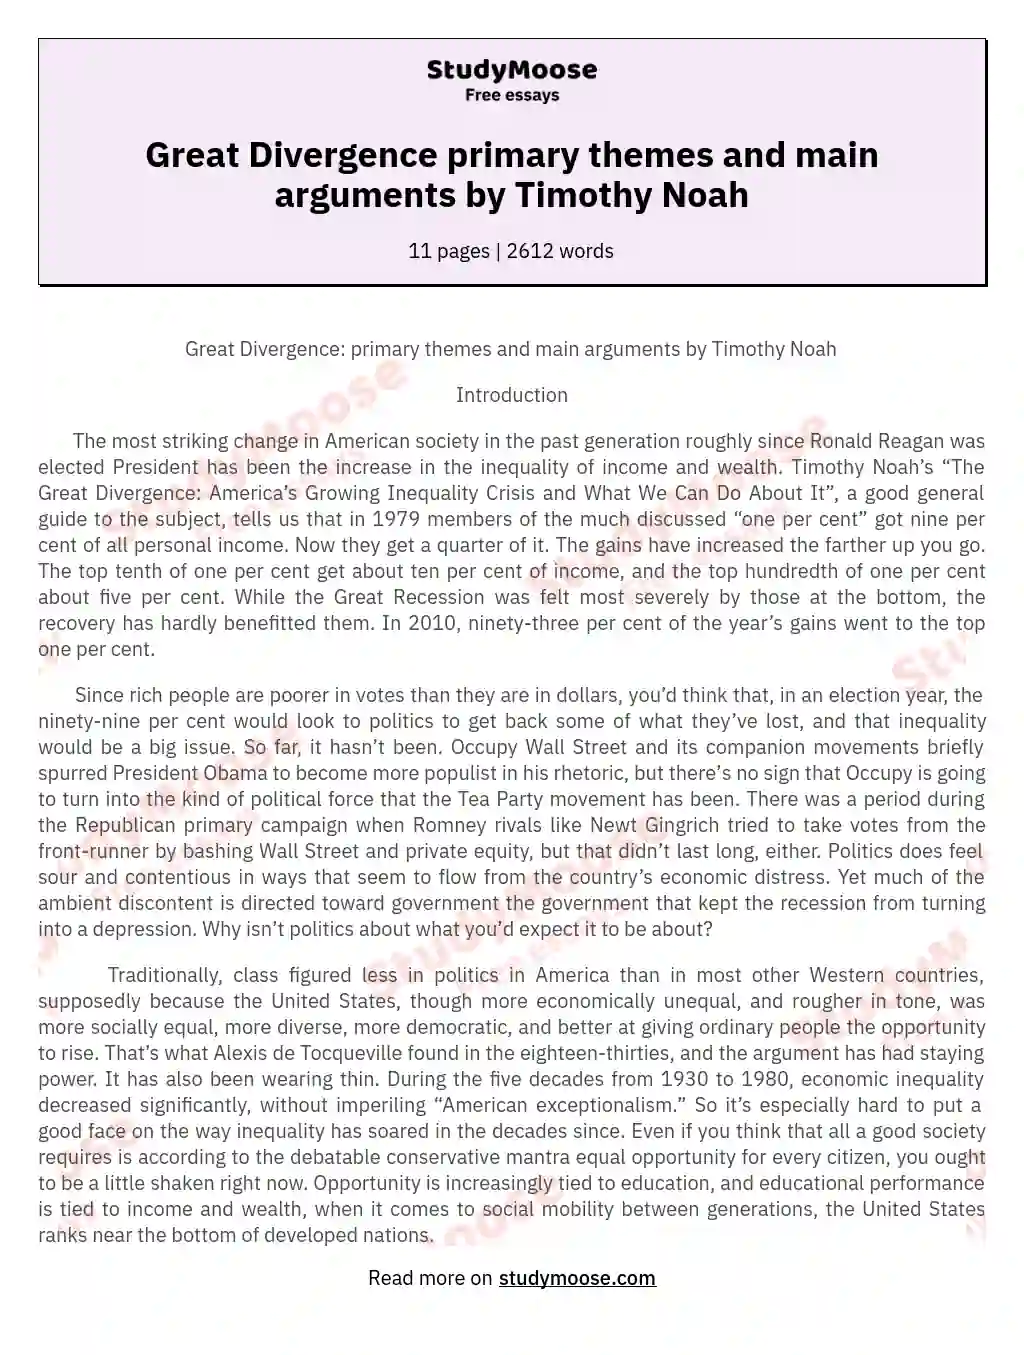 Great Divergence primary themes and main arguments by Timothy Noah